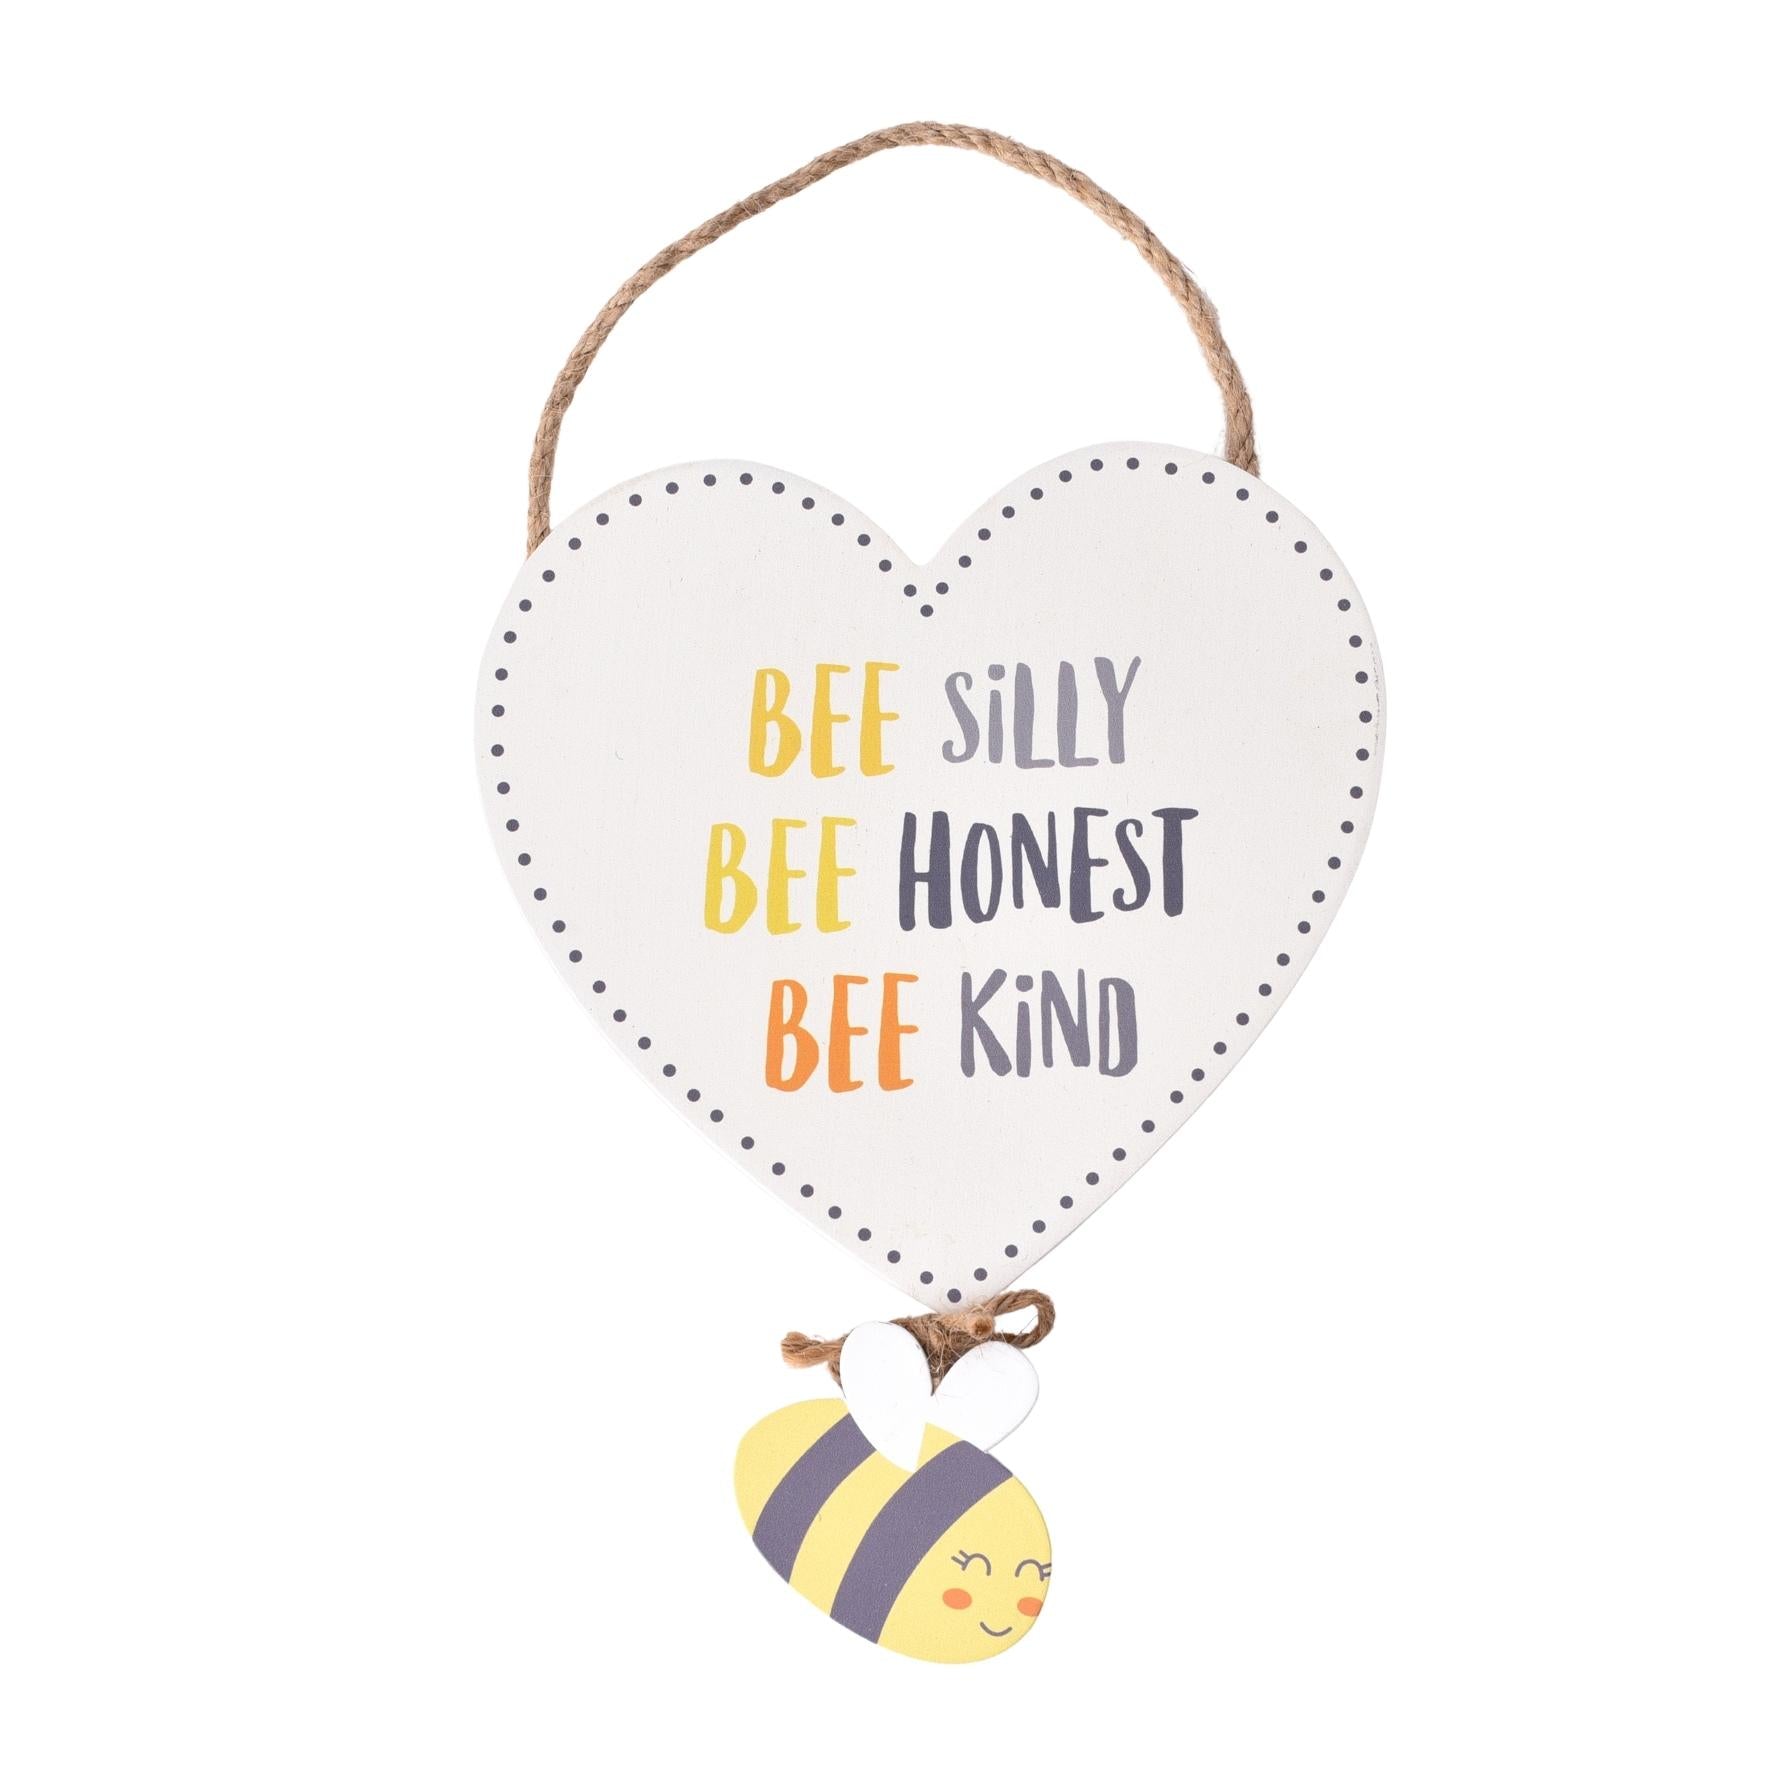 Bee Silly Kind & Honest Hanging Plaque - Penny Rose Home and Gifts